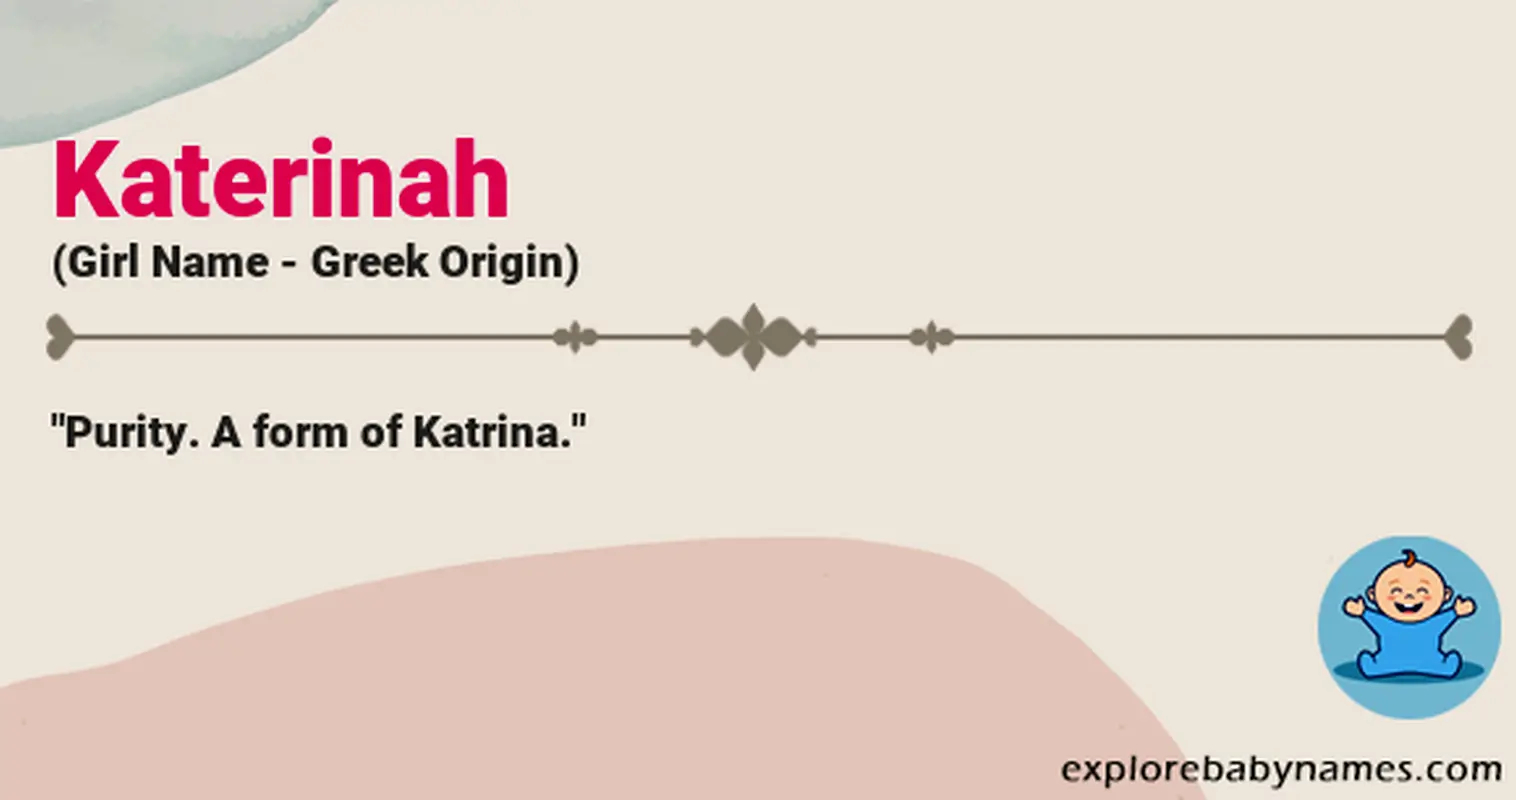 Meaning of Katerinah